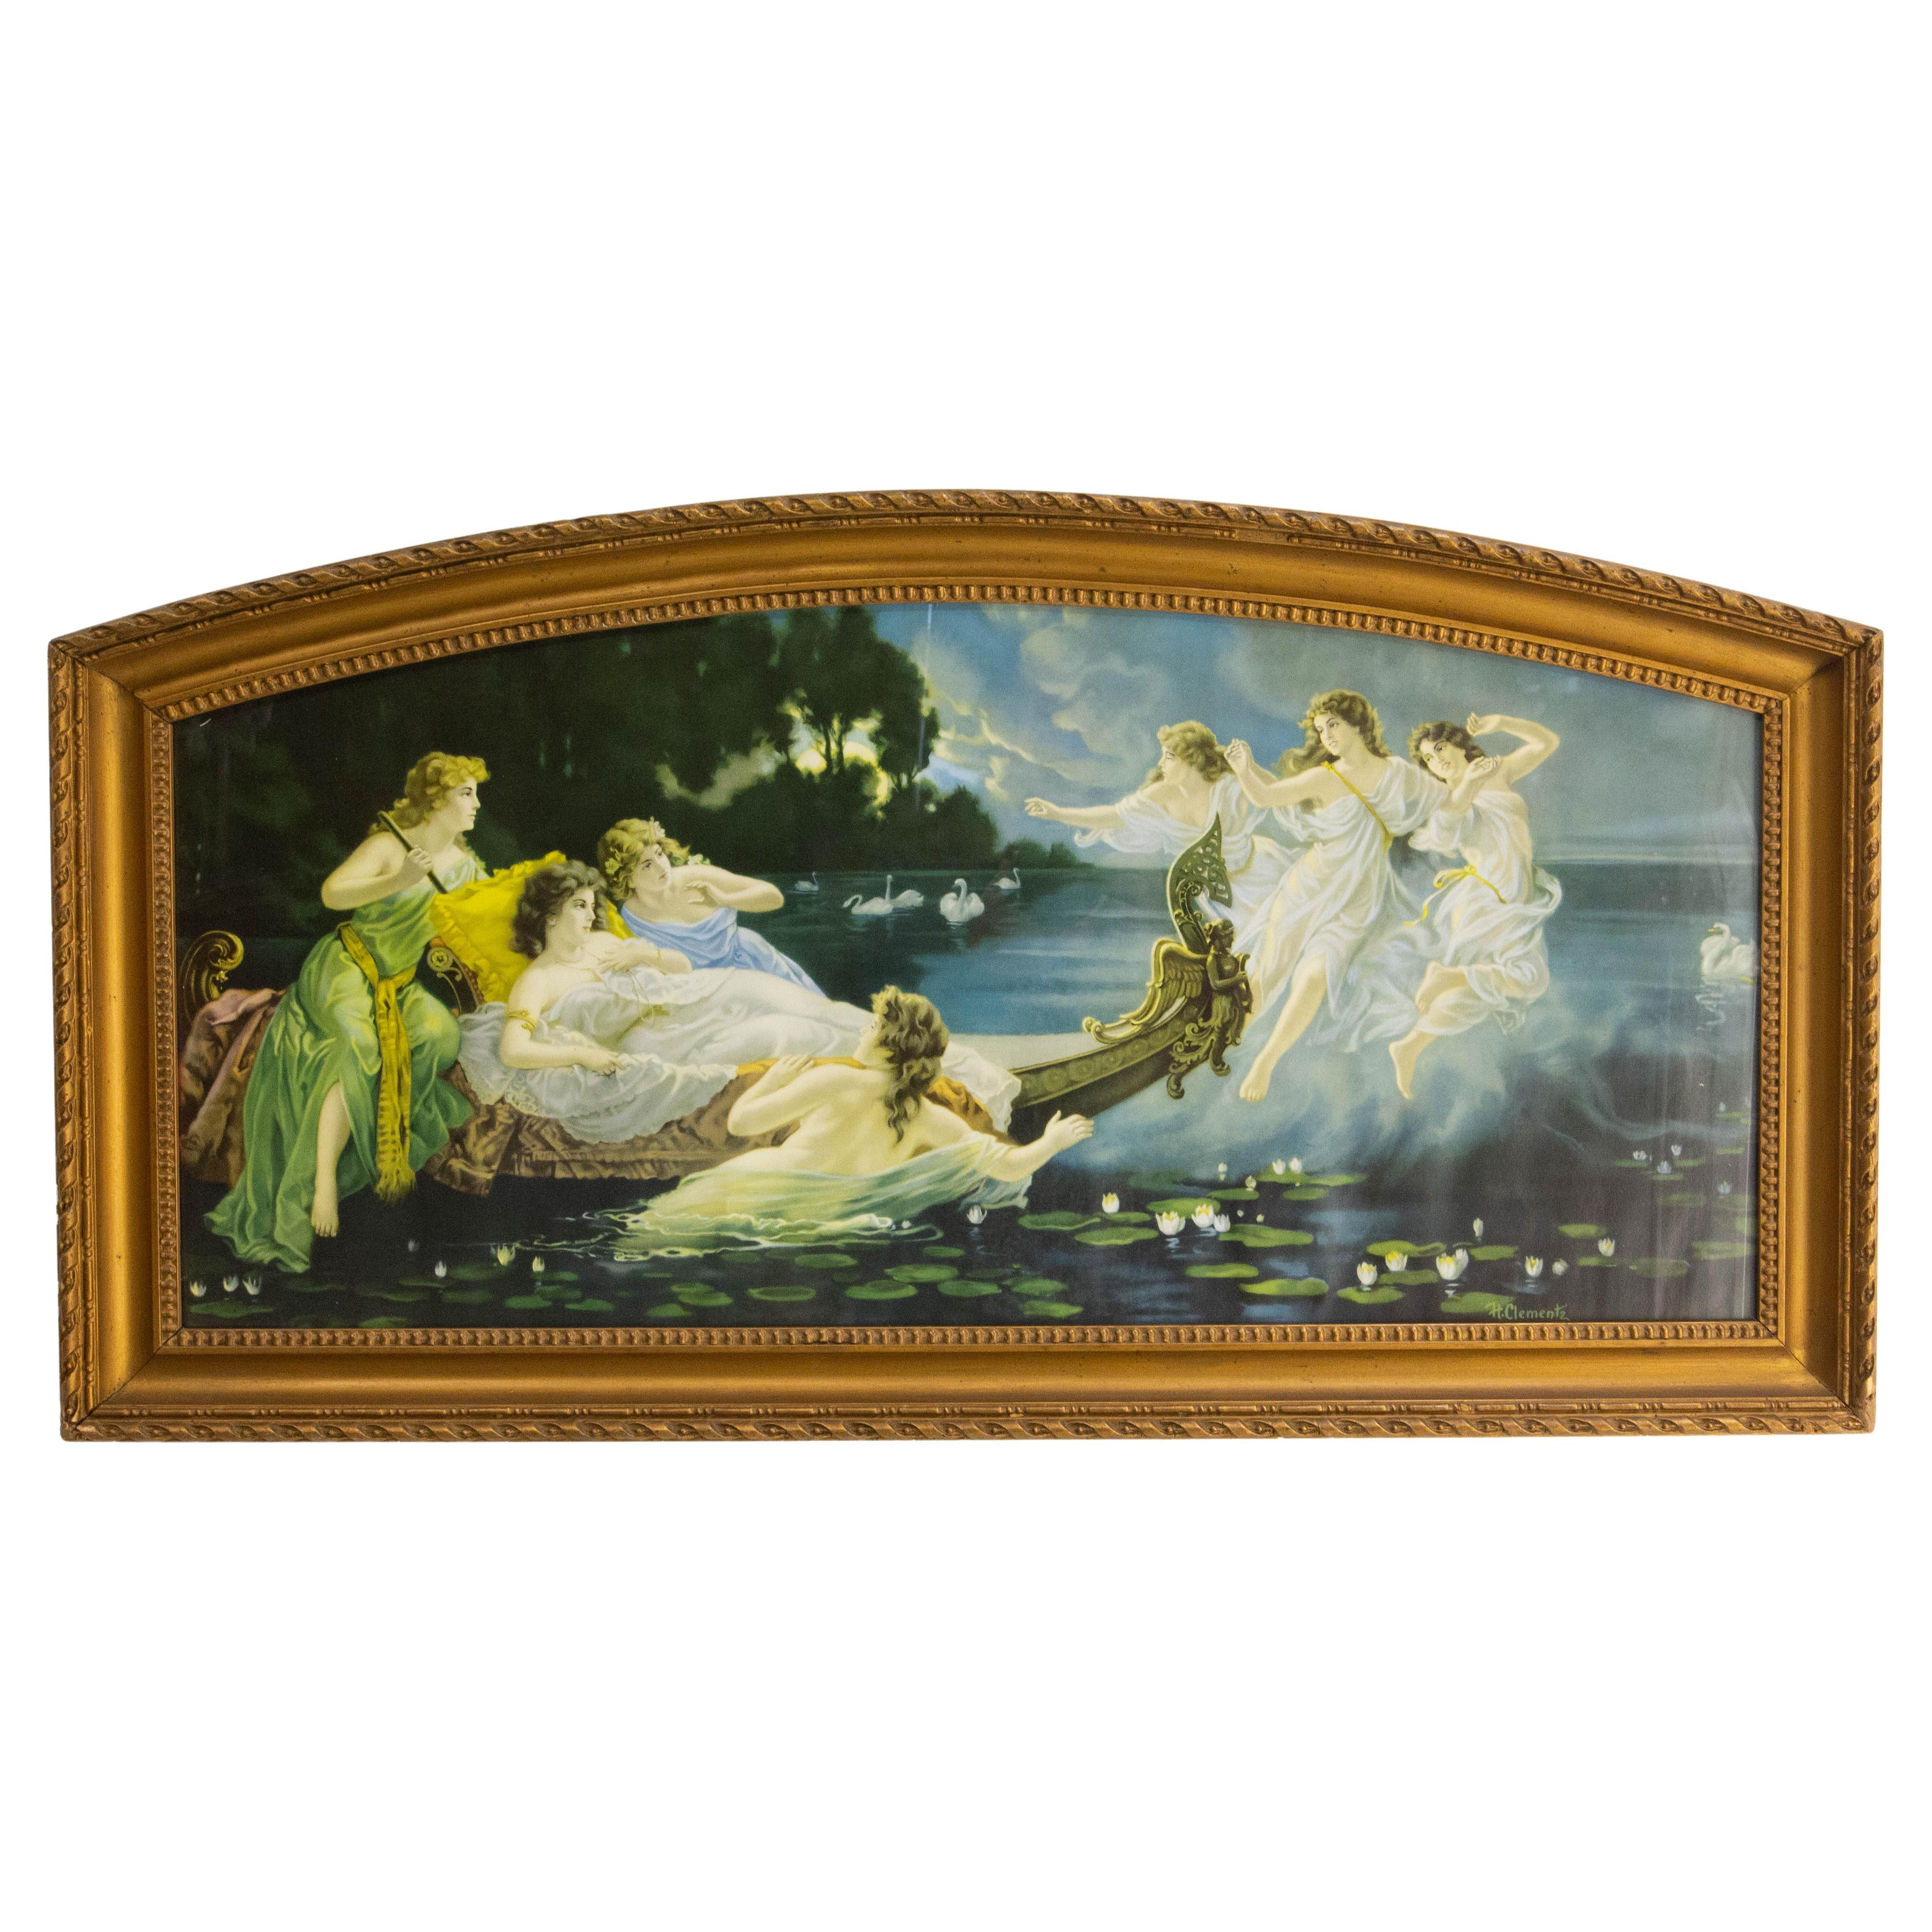 Chromo-Lithograph Boat of Nymphs by H Clementz in Its Frame, Late 19th Century For Sale